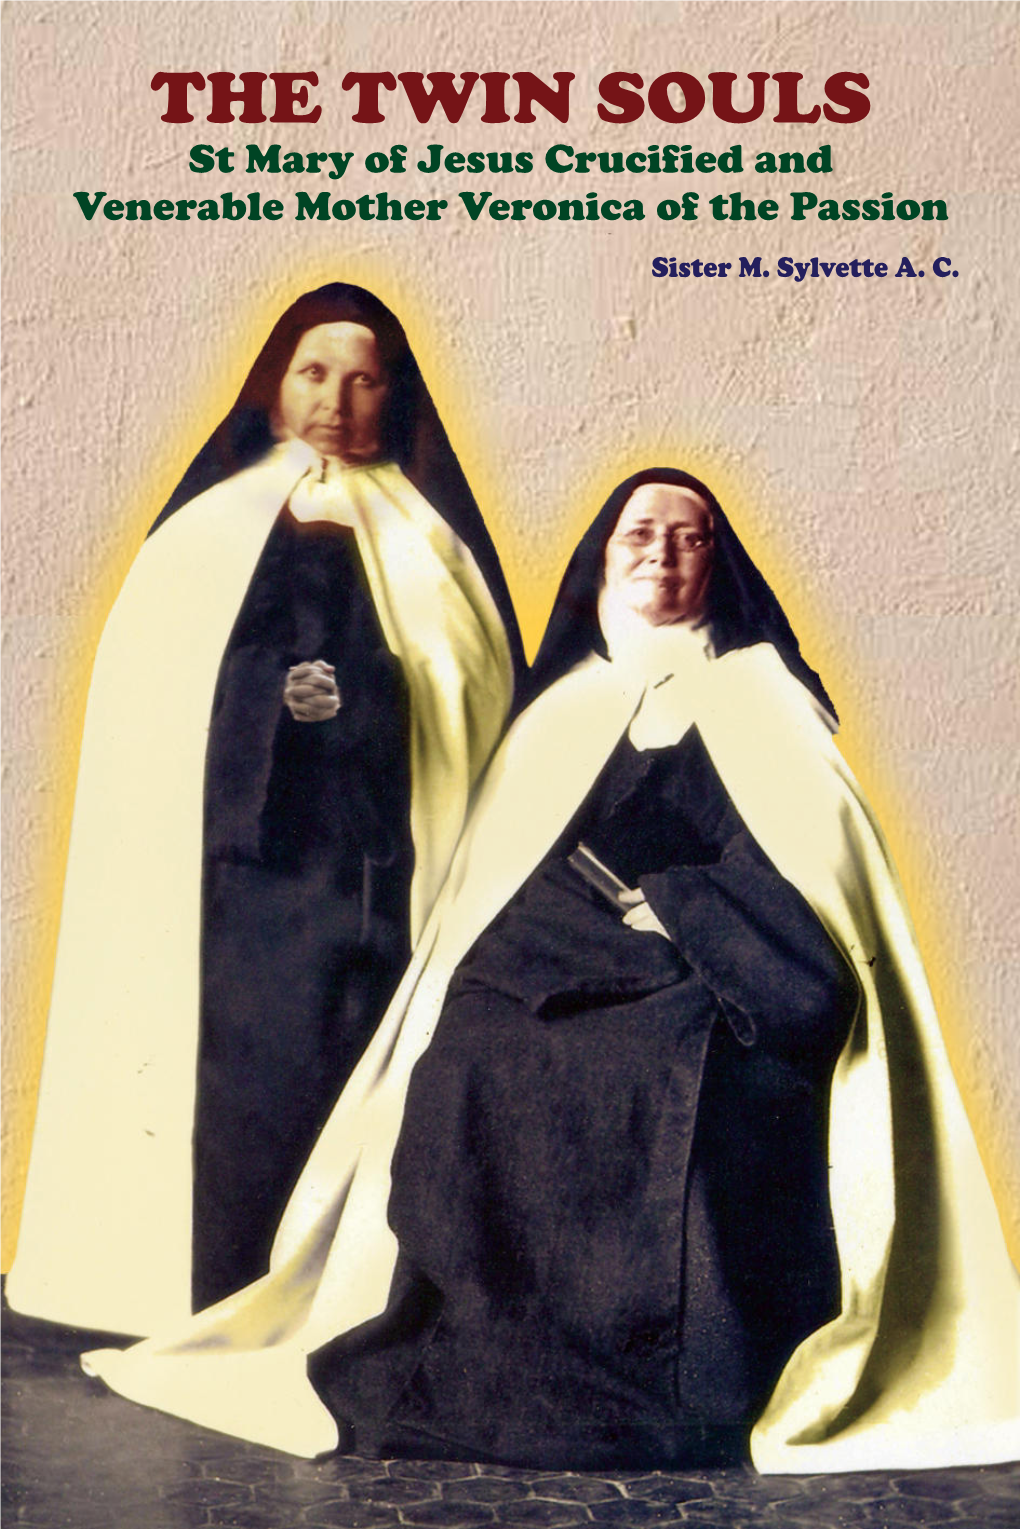 THE TWIN SOULS St Mary of Jesus Crucified and Venerable Mother Veronica of the Passion Sister M